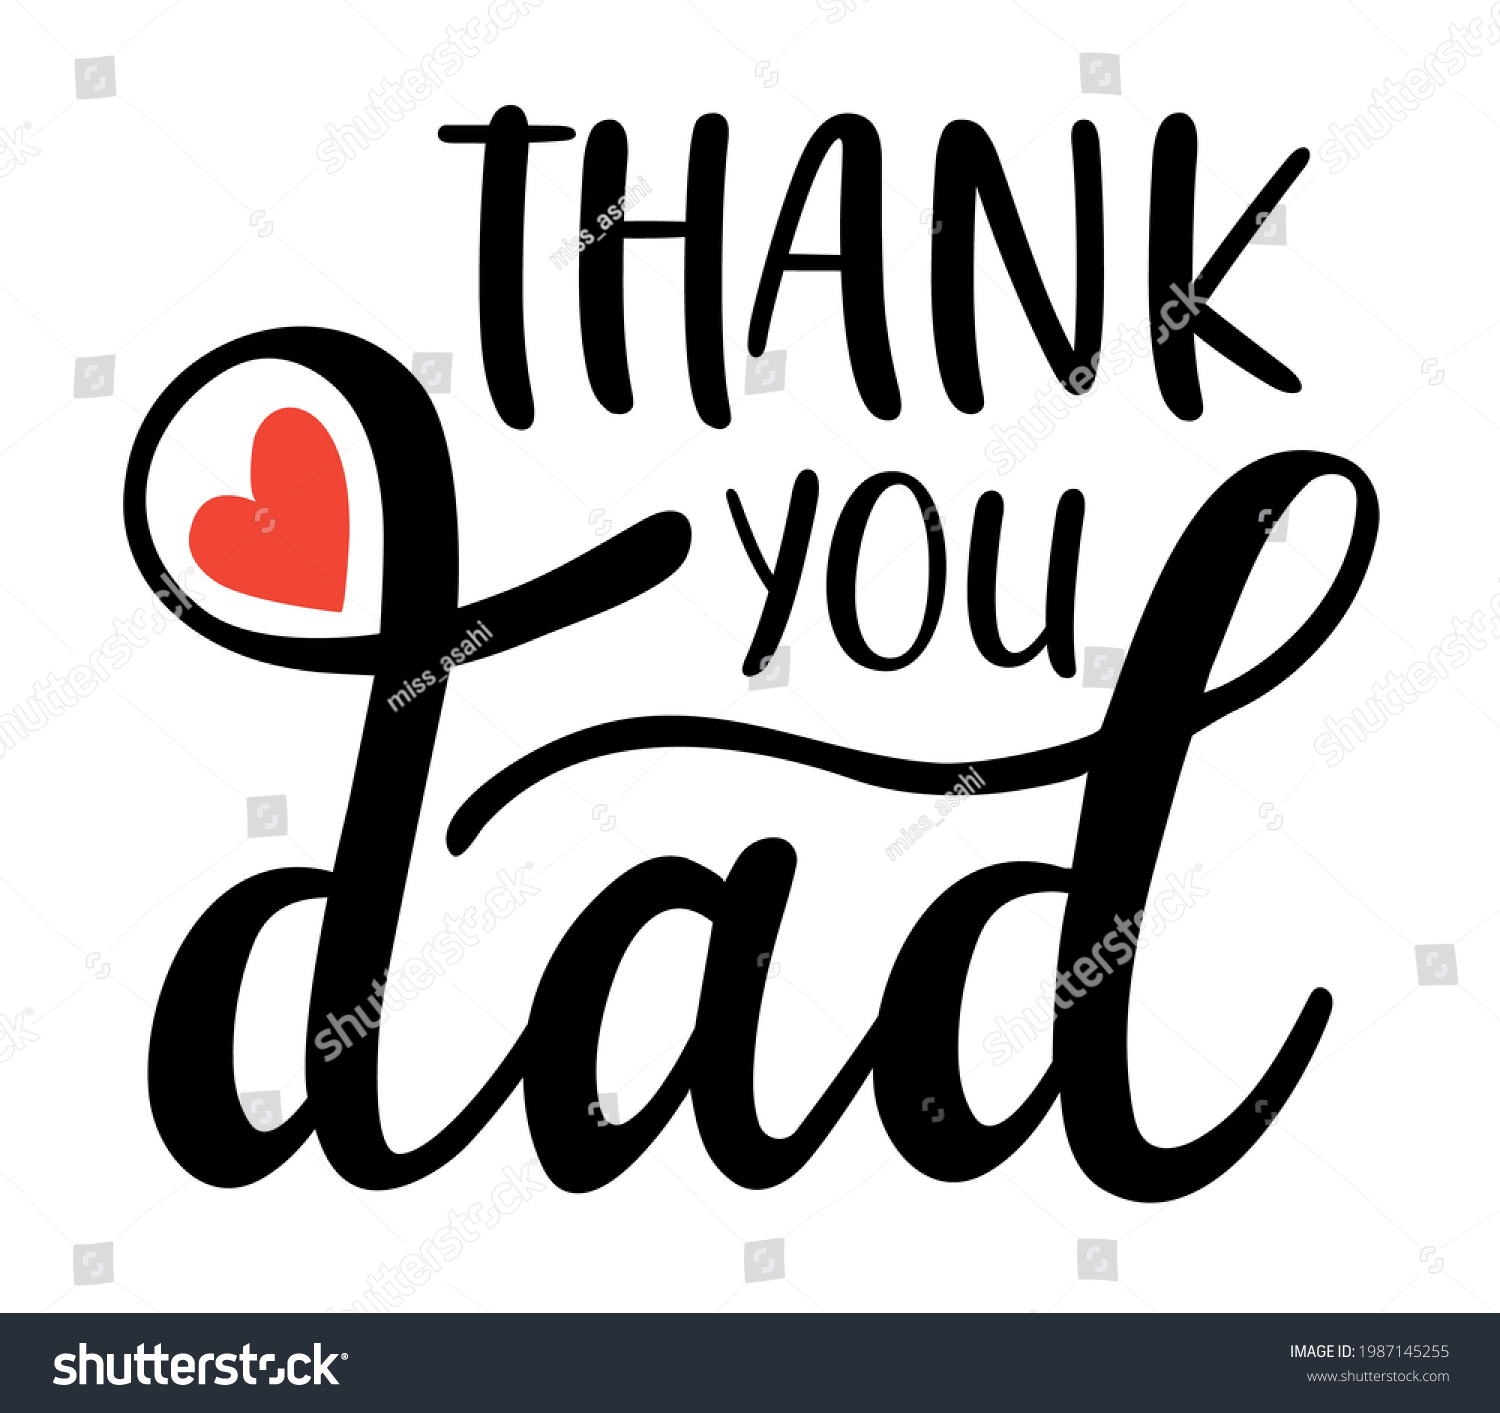 4,262 Thanks dad Images, Stock Photos & Vectors | Shutterstock